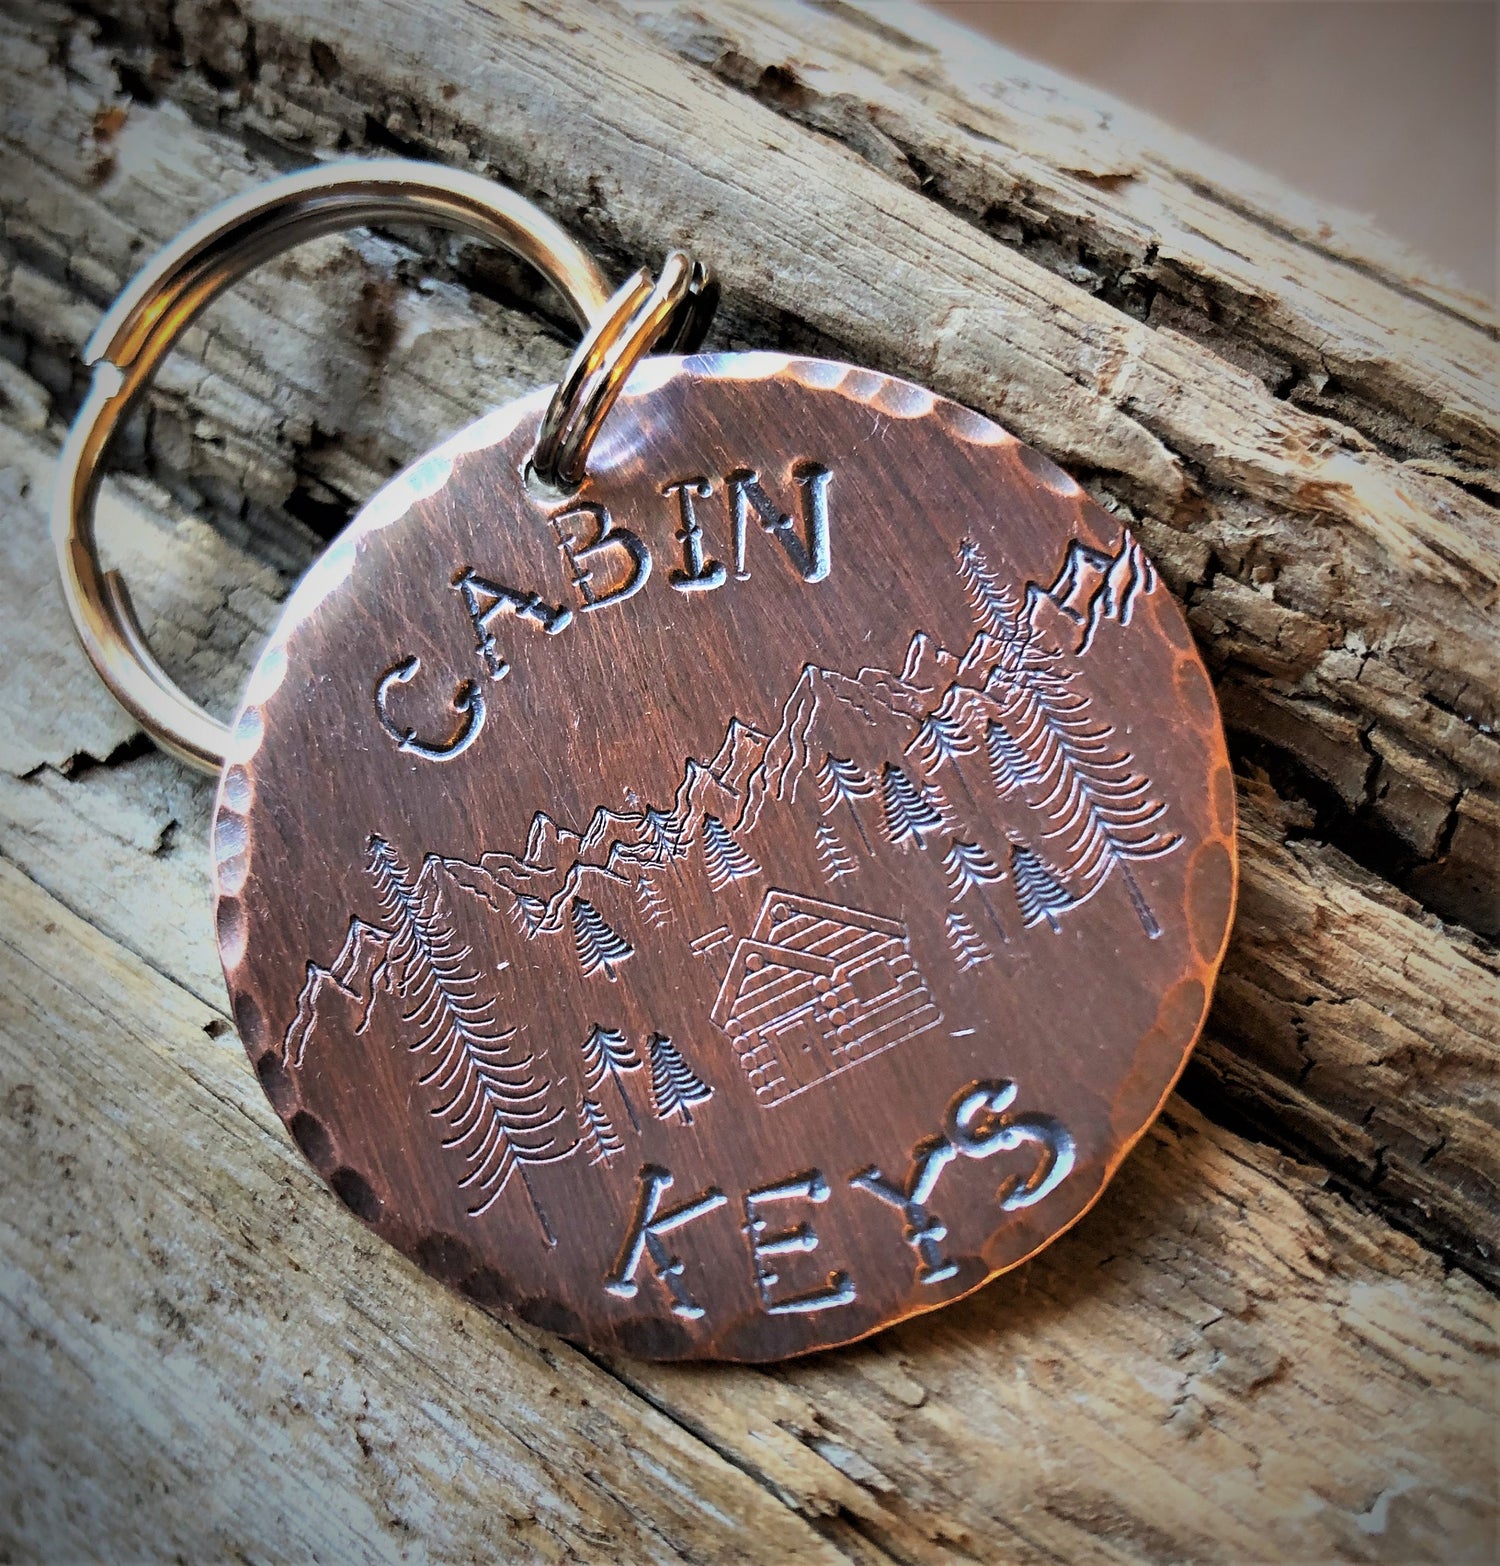 Cabin Keys, Keychain for Cabin, Cottage Keychain, Gift for Second Home, Hand Stamped Cabin Keychain, Housewarming Gift